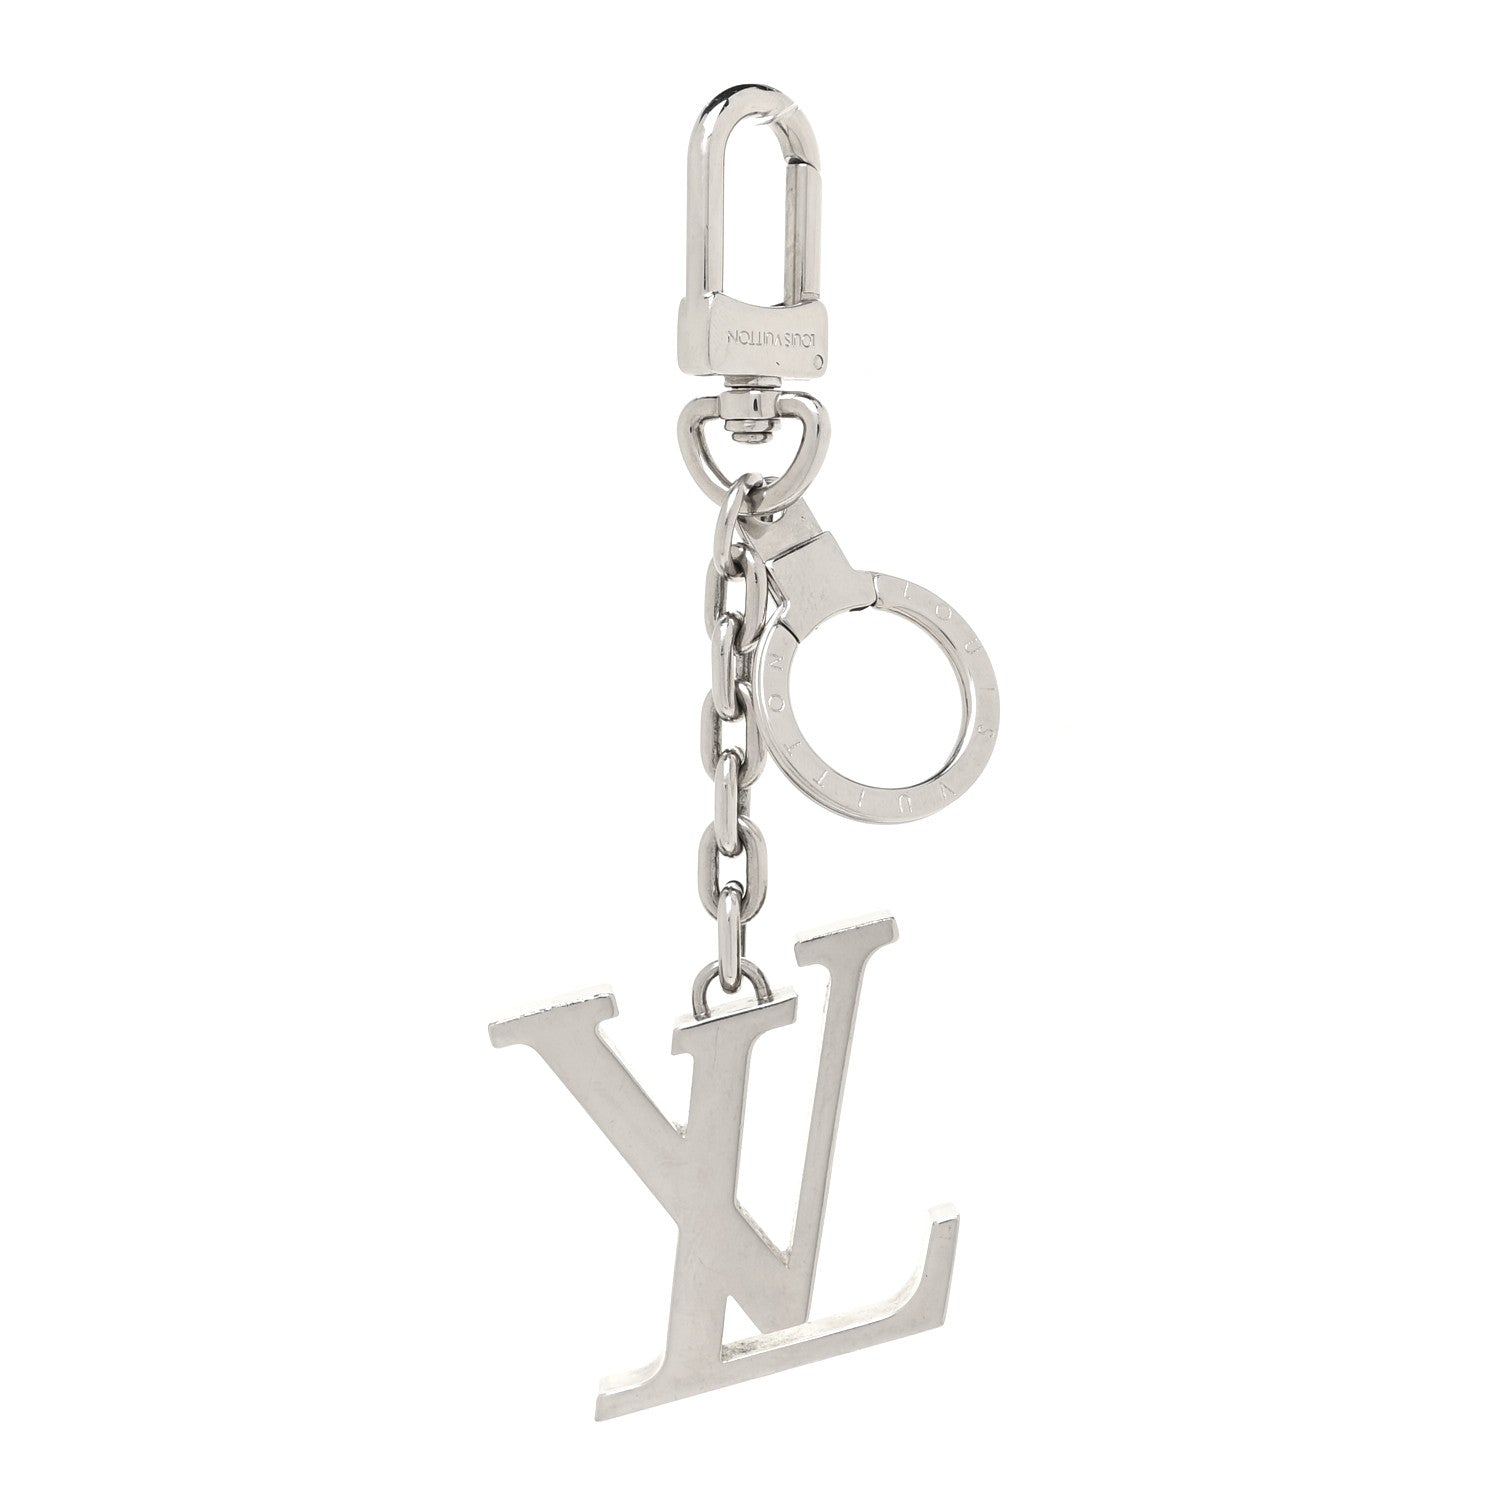 Louis Vuitton LV initials Key Holder and Bag Charm Silver Metal